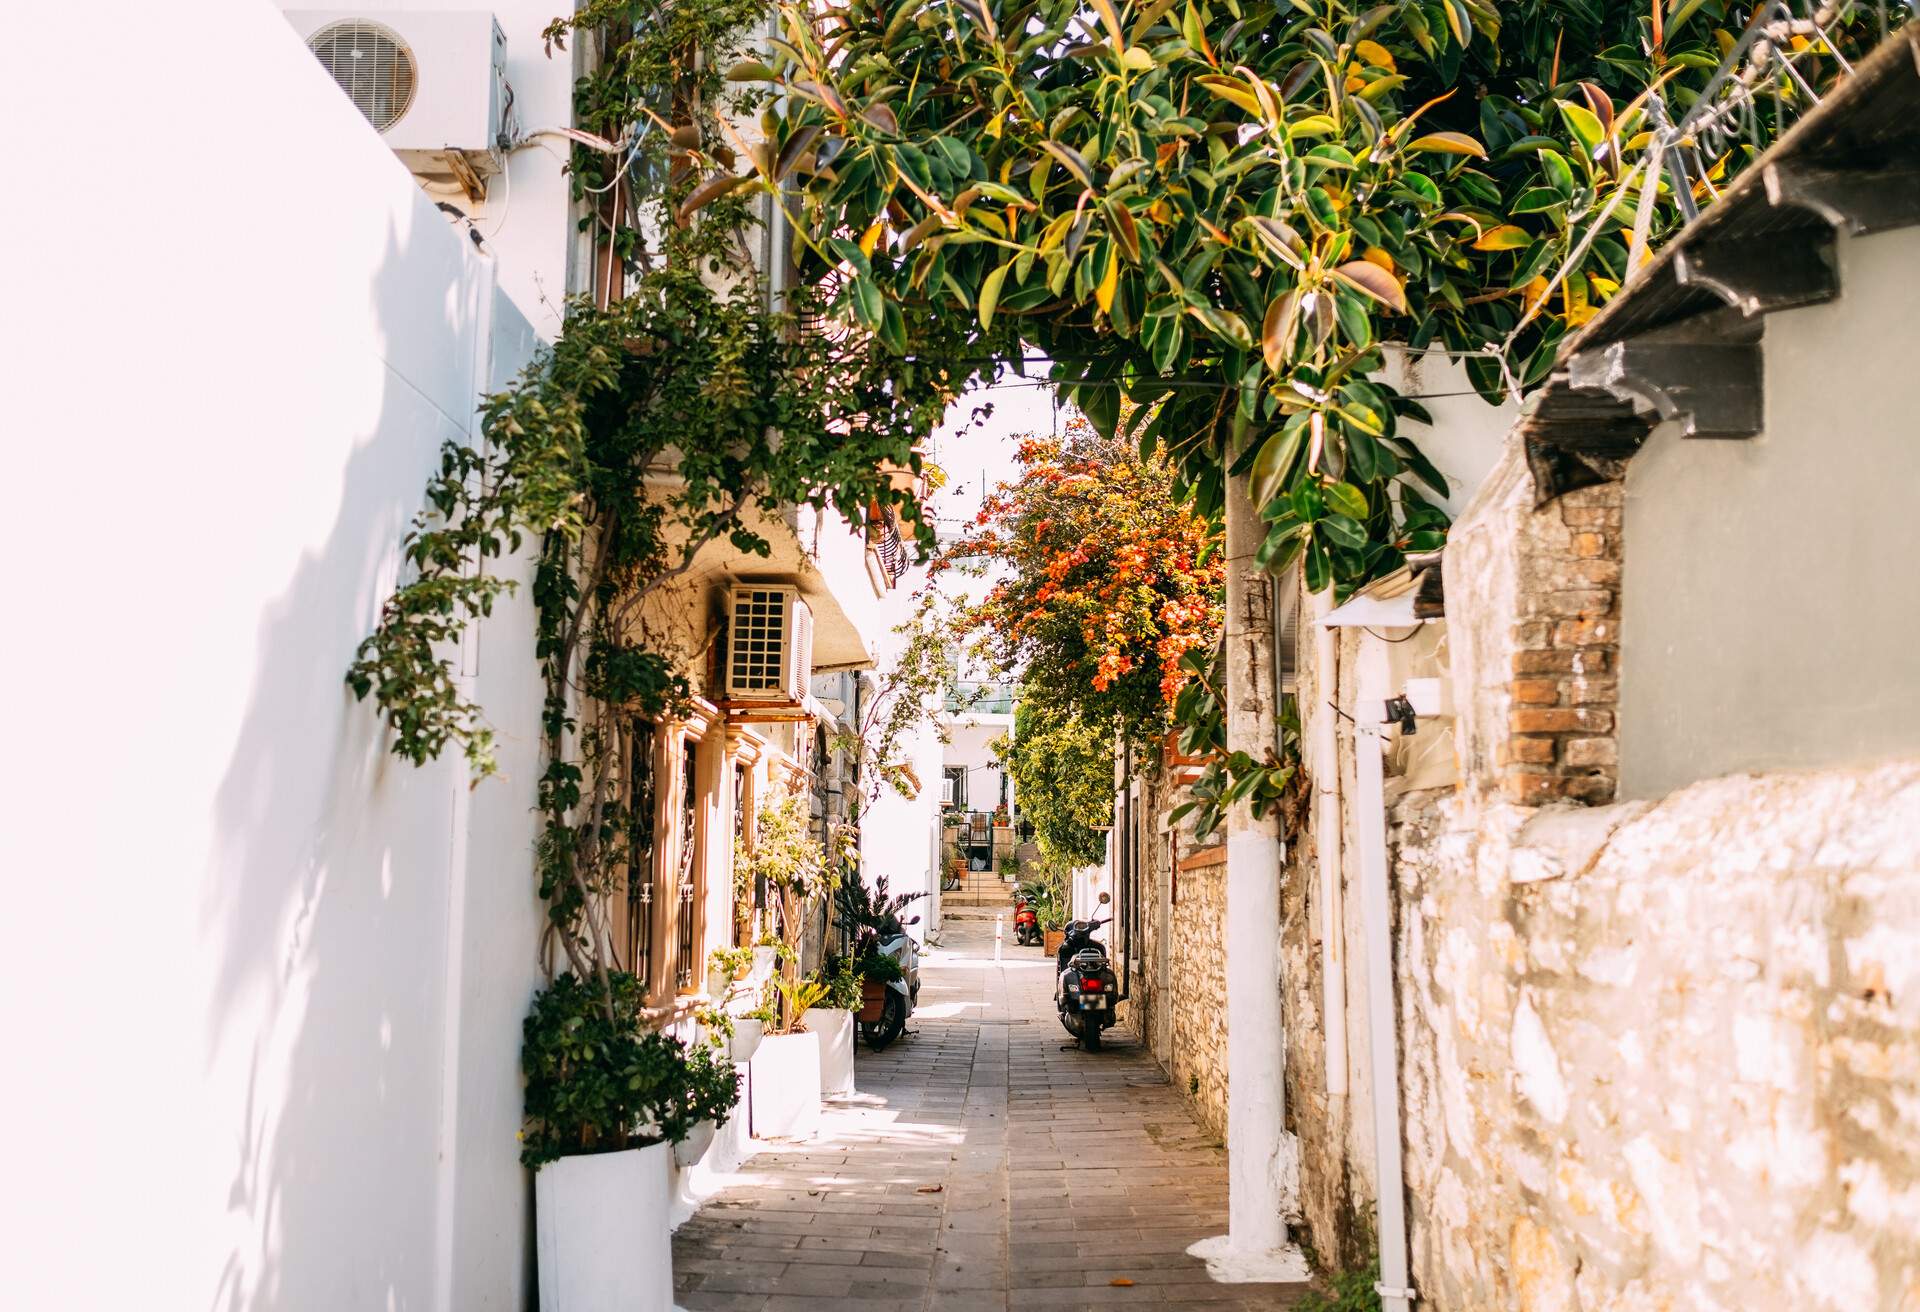 Narrow and Beautiful Street in the Aegean Town